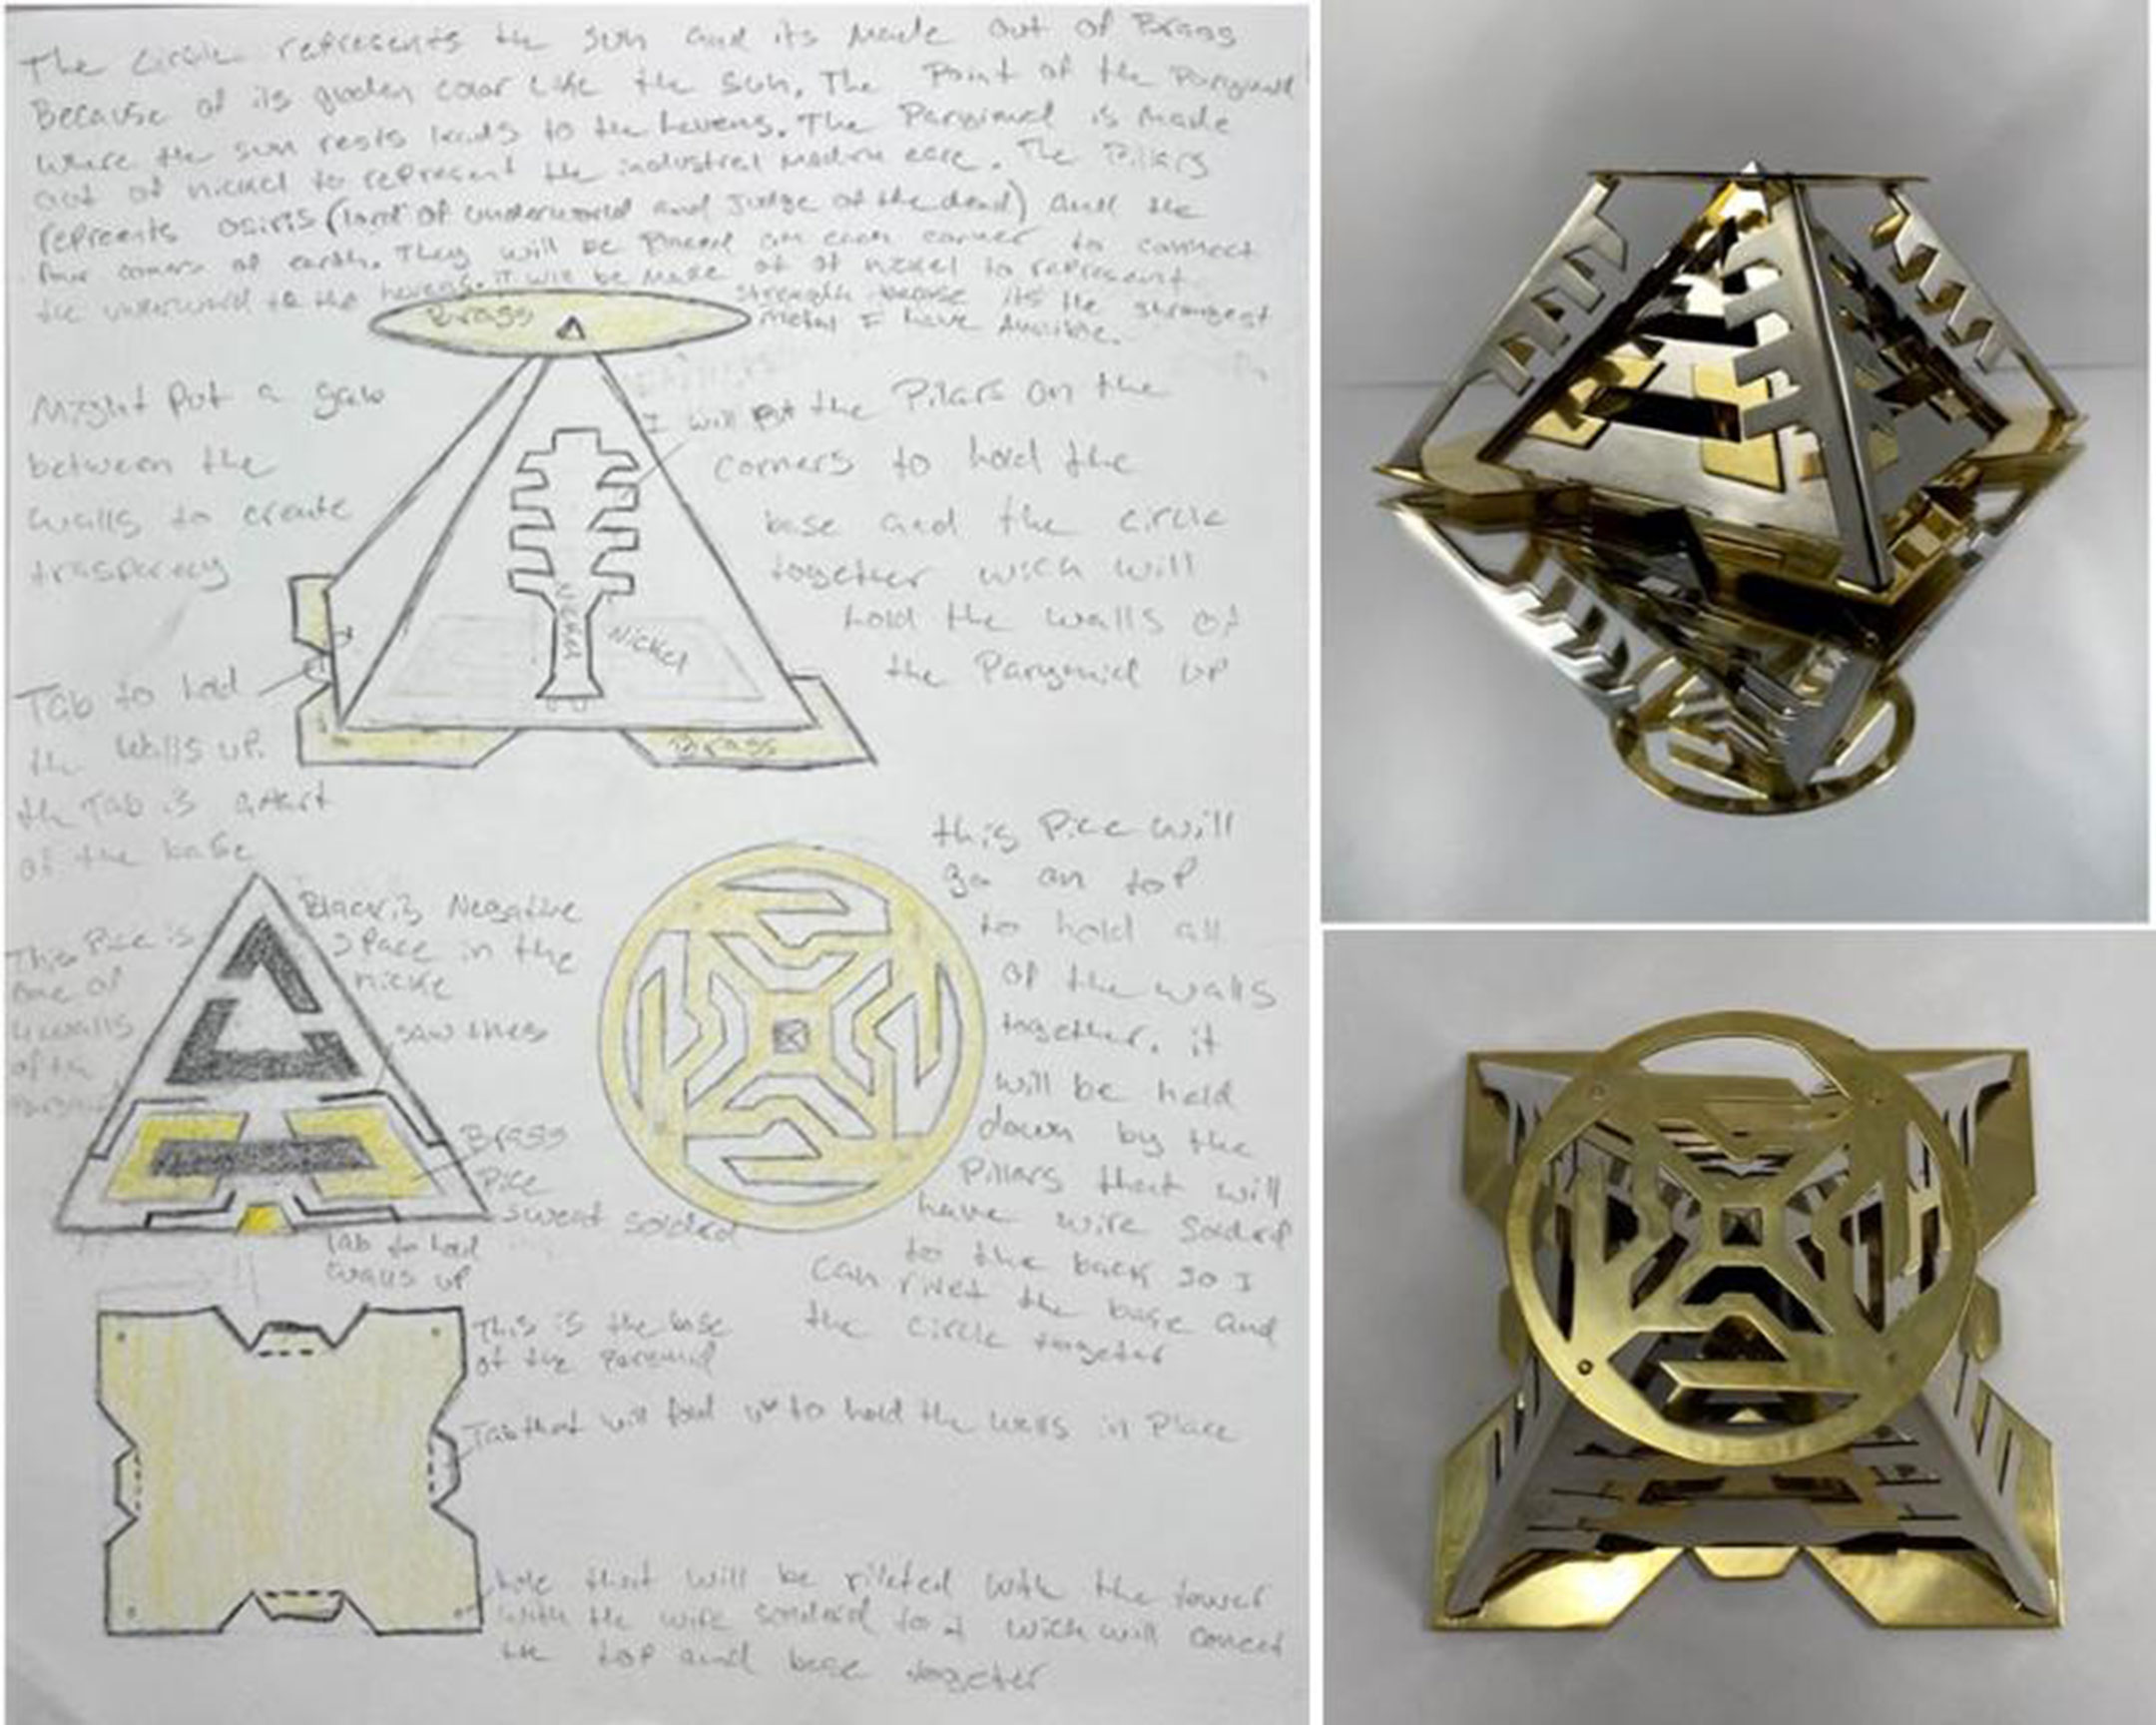 Pyramid sculpture photos, now stacked, with a diagram of it to the left